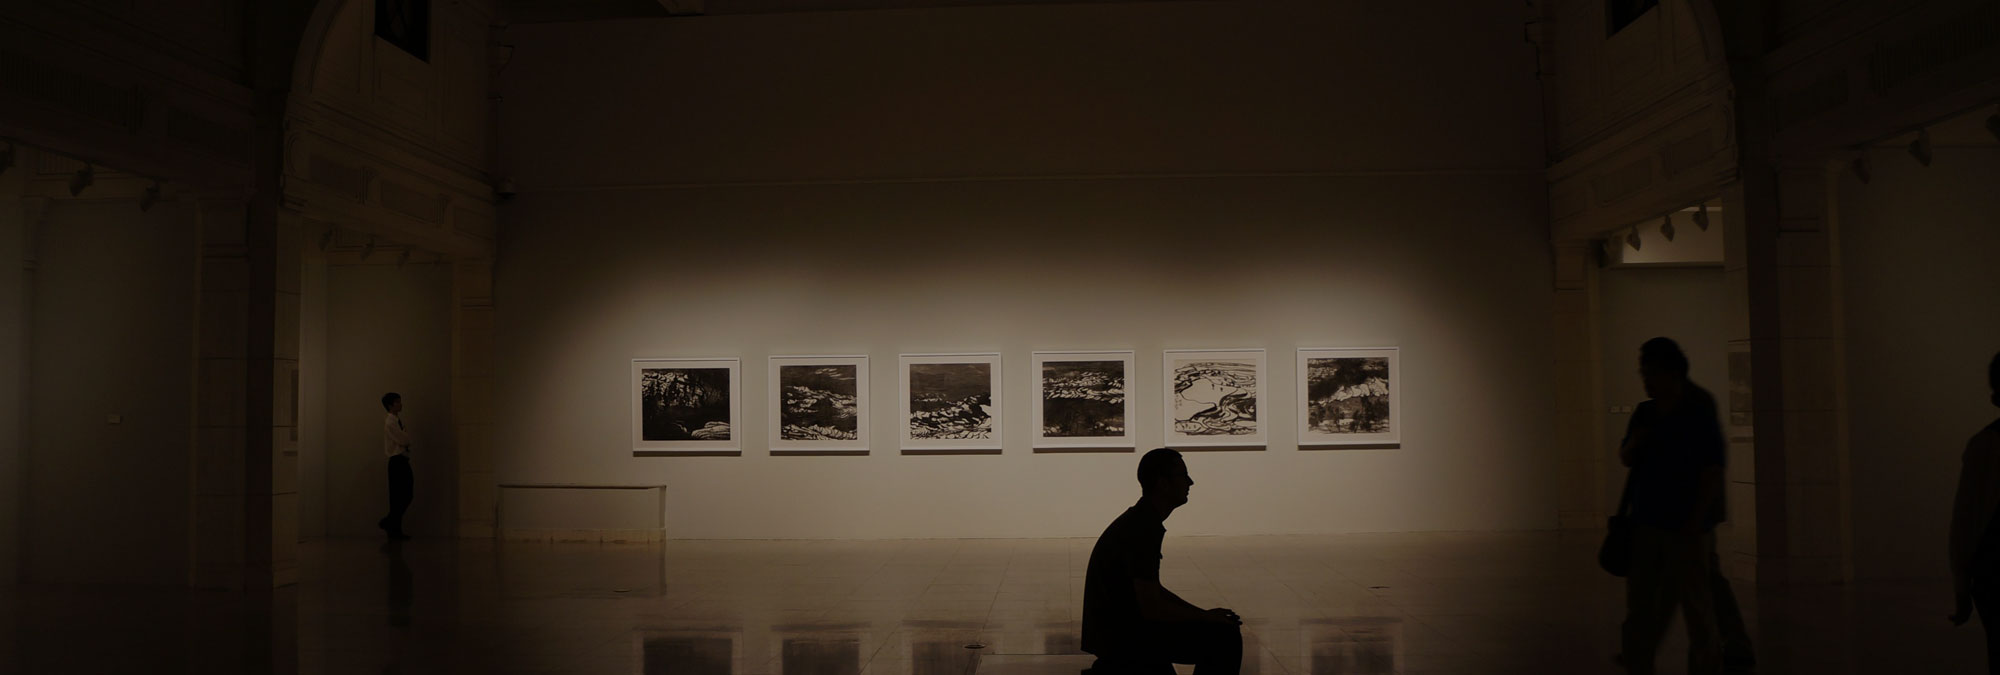 Inside Of A Art Museum With Photographs On The Wall.